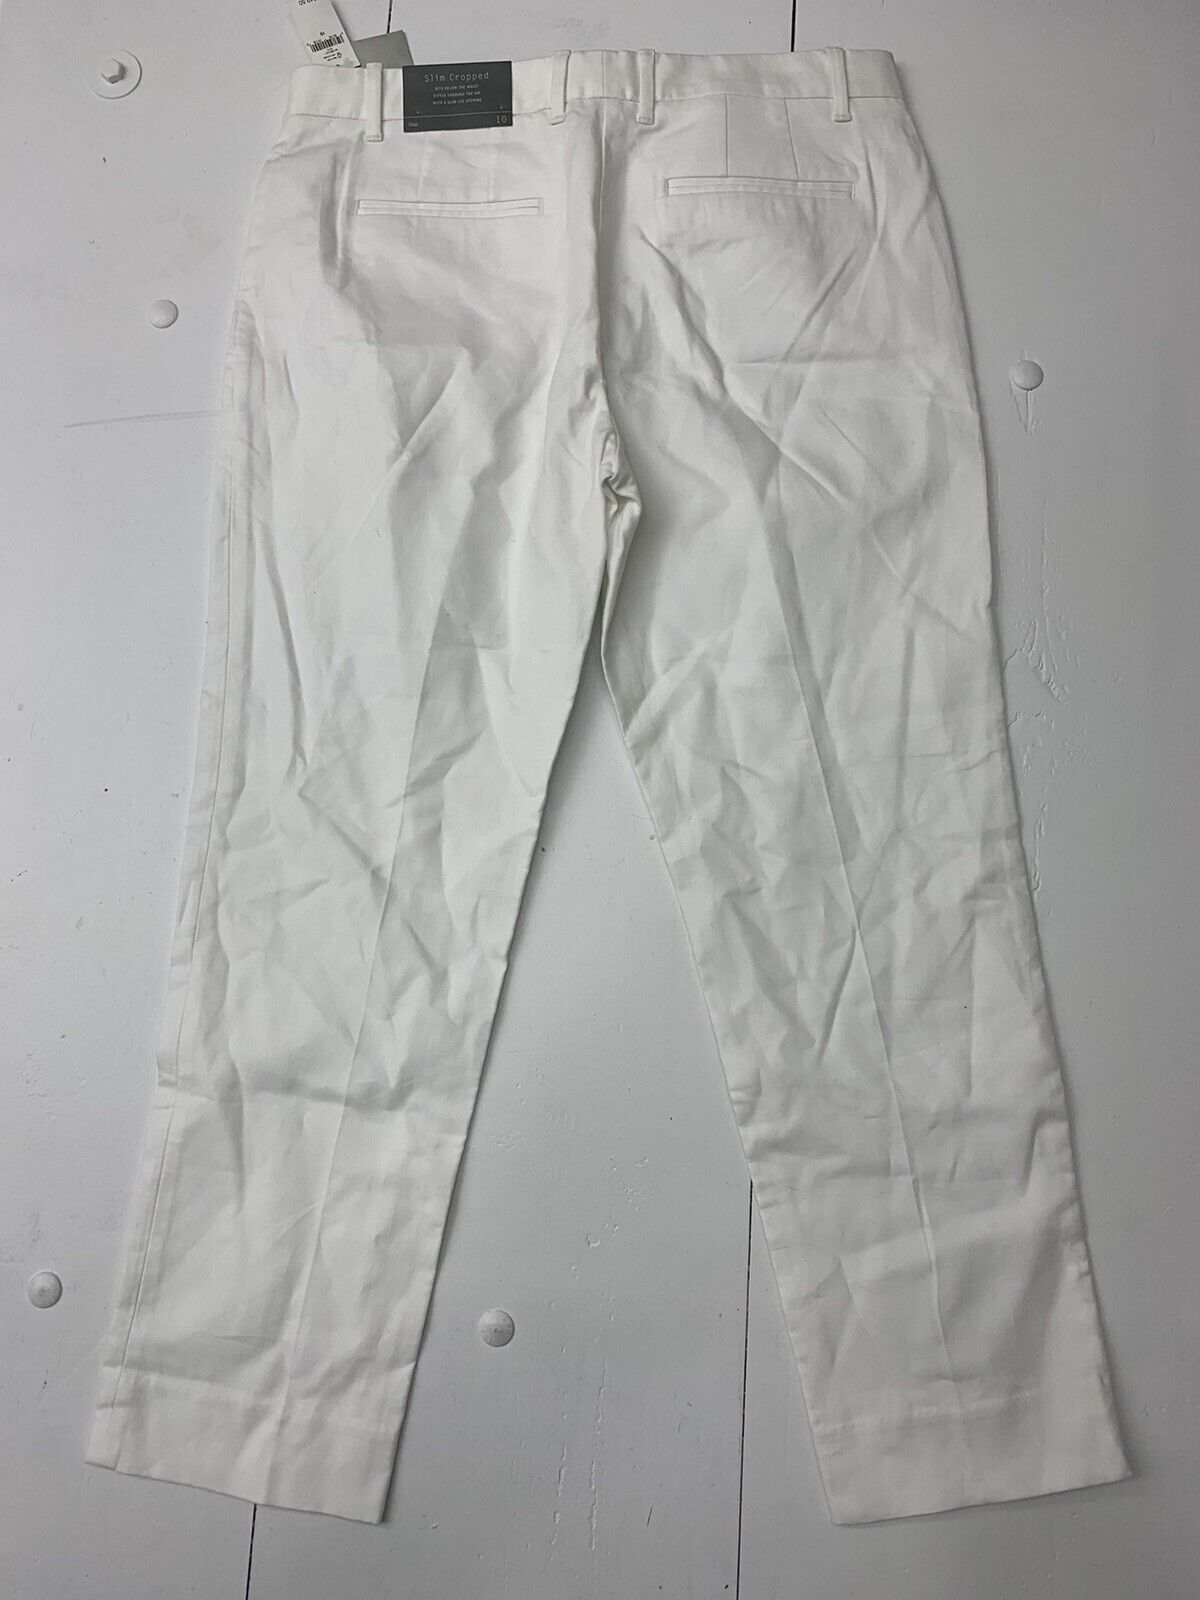 Uniqlo mens pants, Men's Fashion, Bottoms, Jeans on Carousell